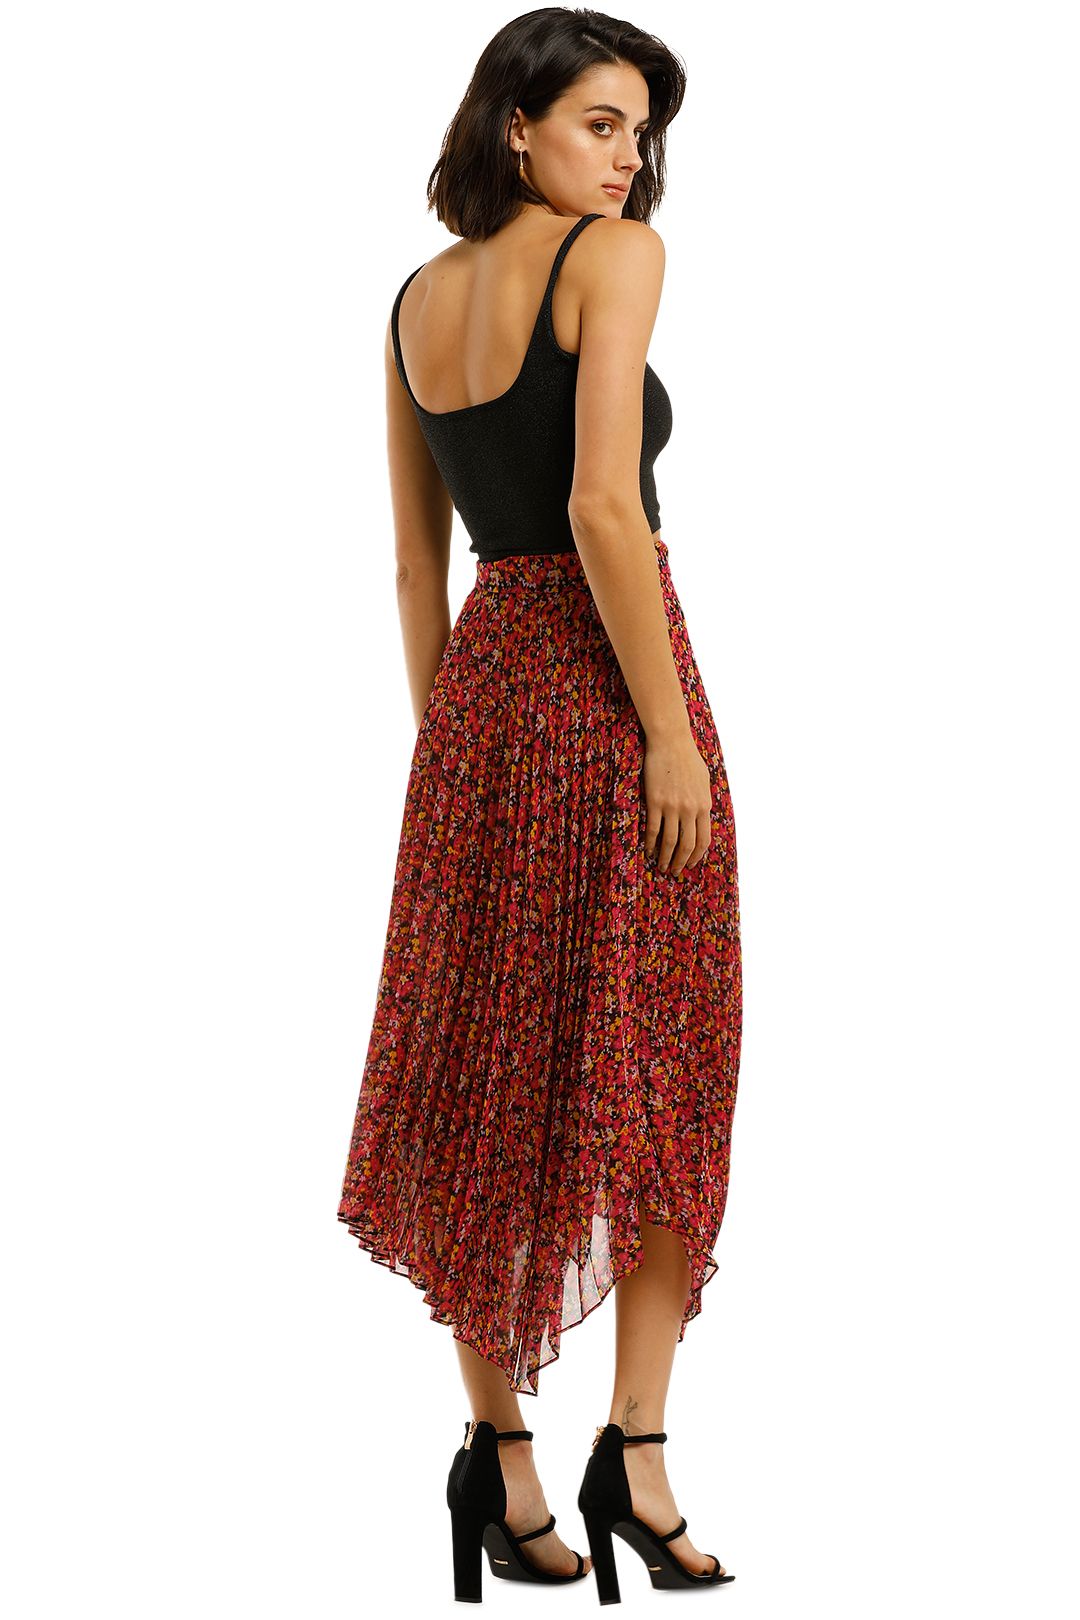 Camilla-and-Marc-Lilia-Skirt-red-Back